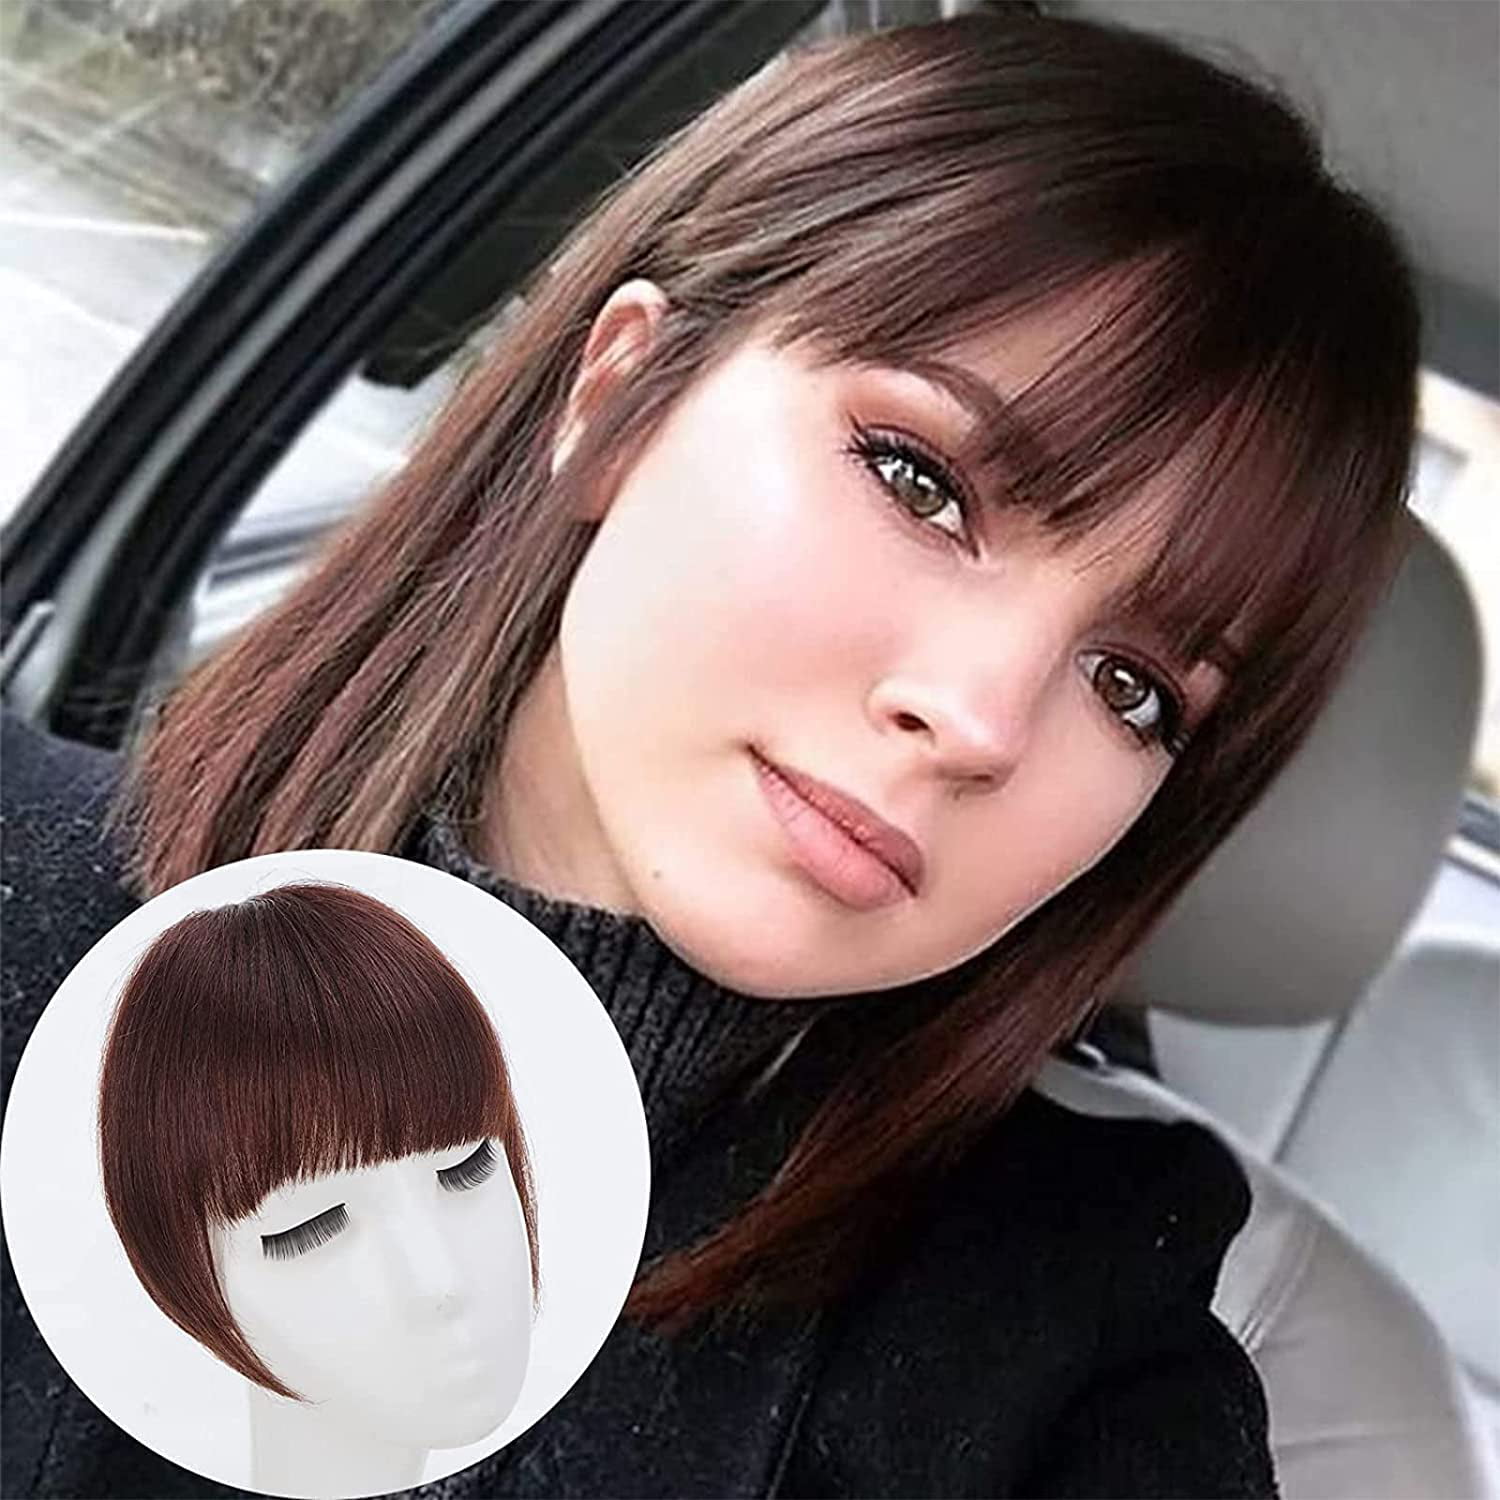 CTRLALT Clip in Bangs 100% Human Hair Extensions Clip Hair Bangs Natural  Full Front Face Hairpieces for Women Bangs Hair Clip on Bangs Temples One  Piece Hairpiece Fringe Bangs with Nice (Brown